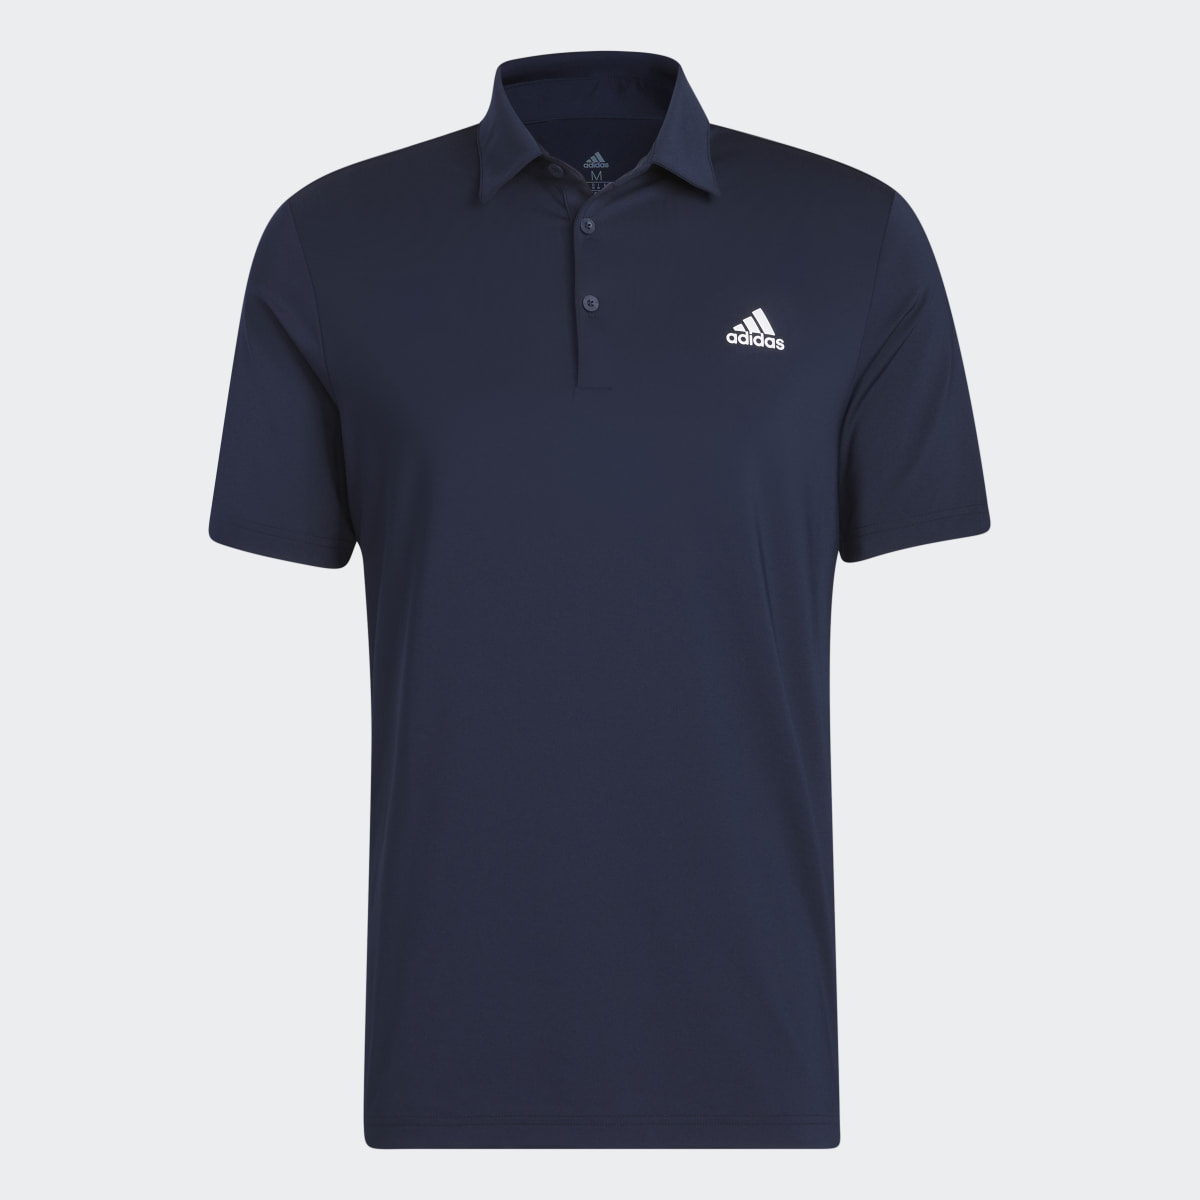 Adidas Ultimate365 Solid Left Chest Poloshirt. 5